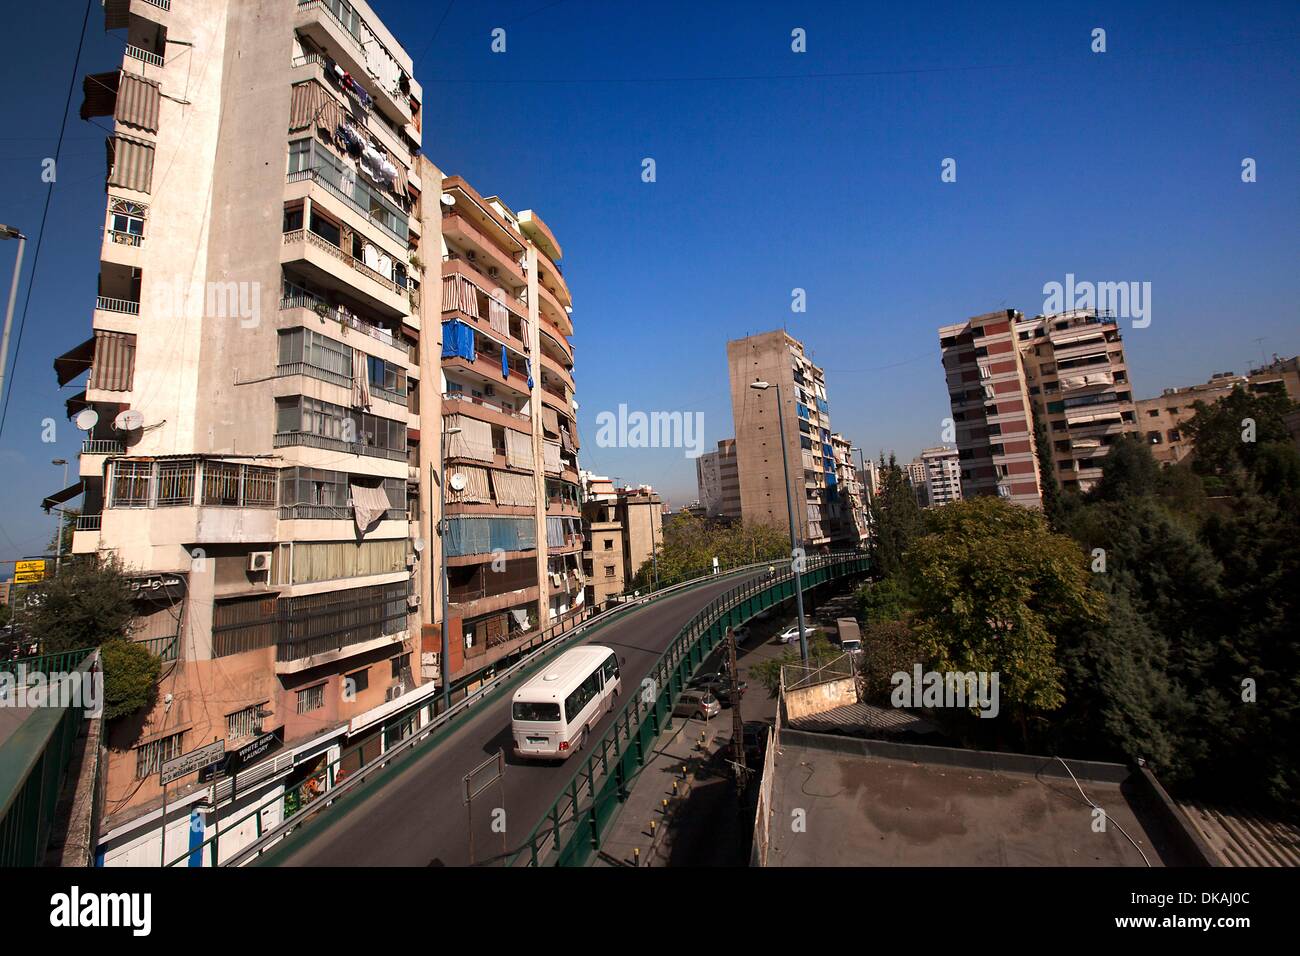 Beirut is the capital and largest city of Lebanon. As there has been no recent population census, the exact population is unknown; estimates in 2007 ranged from slightly more than 1 million to slightly less than 2 million. Located on a peninsula at the m Stock Photo